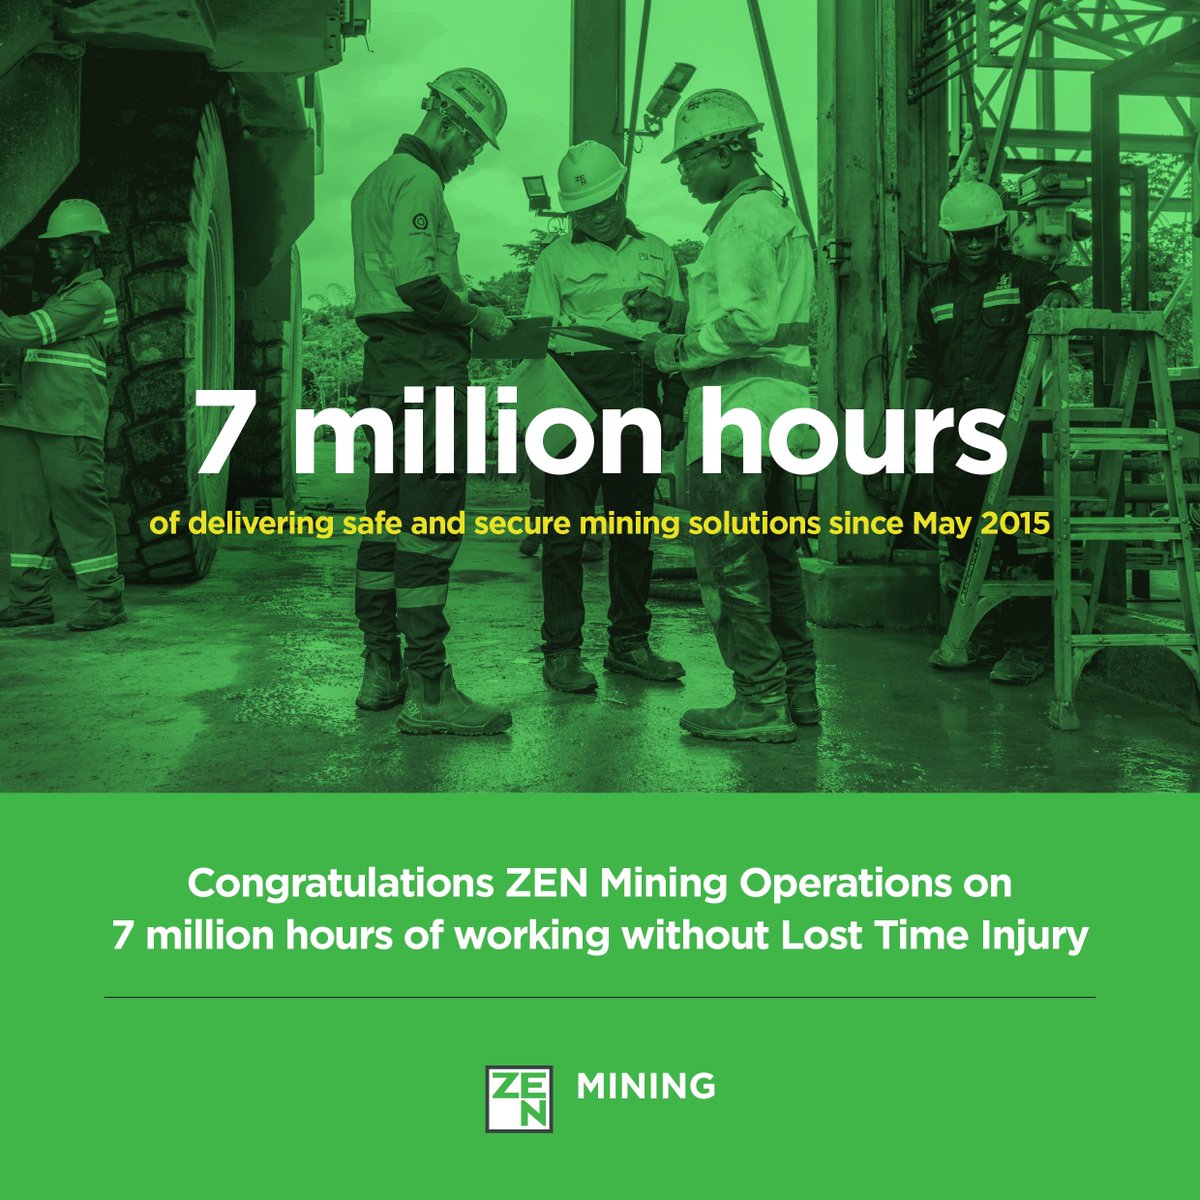 Congratulations to the ZEN Mining Operations Team on 7 million LTI free manhours. 

Our people are continuously working to deliver end to end mining fuel solutions that ensure #safety, #securityofsupply and #qualityofproduct #theZENway